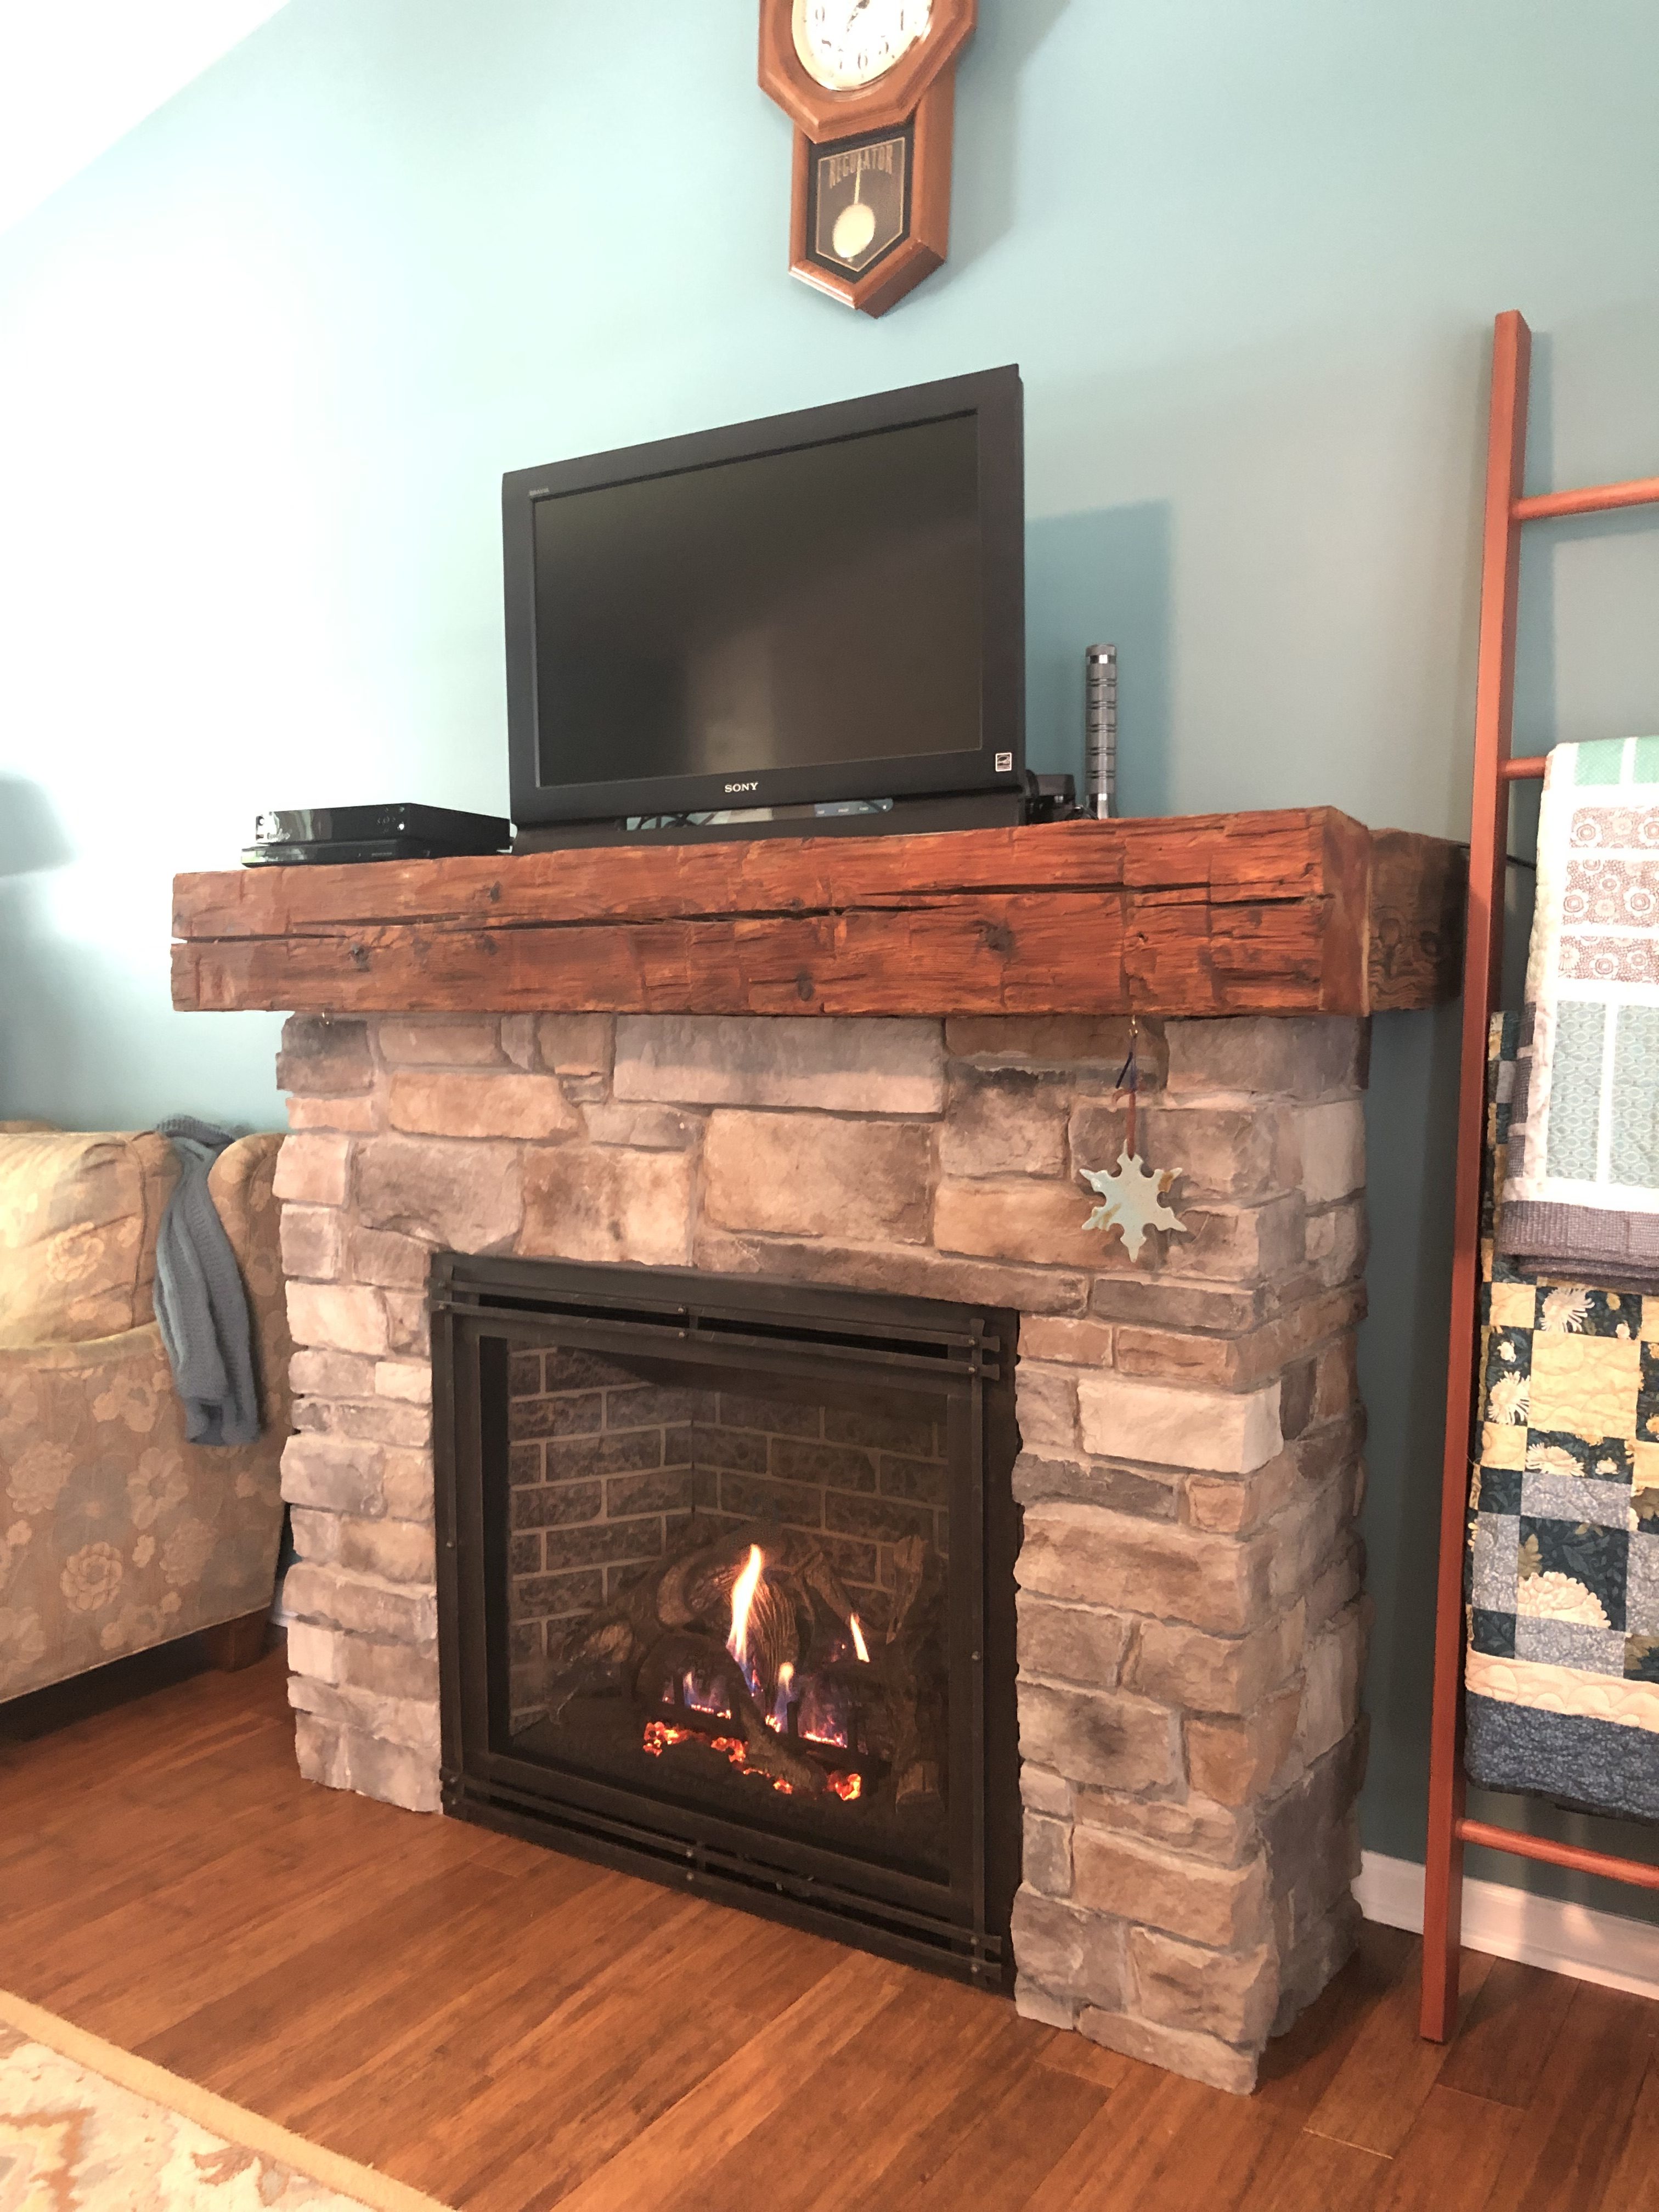 Image of a traditional Bayport 36-L gas fireplace by Kozy Heat featuring stone facing and mantle.